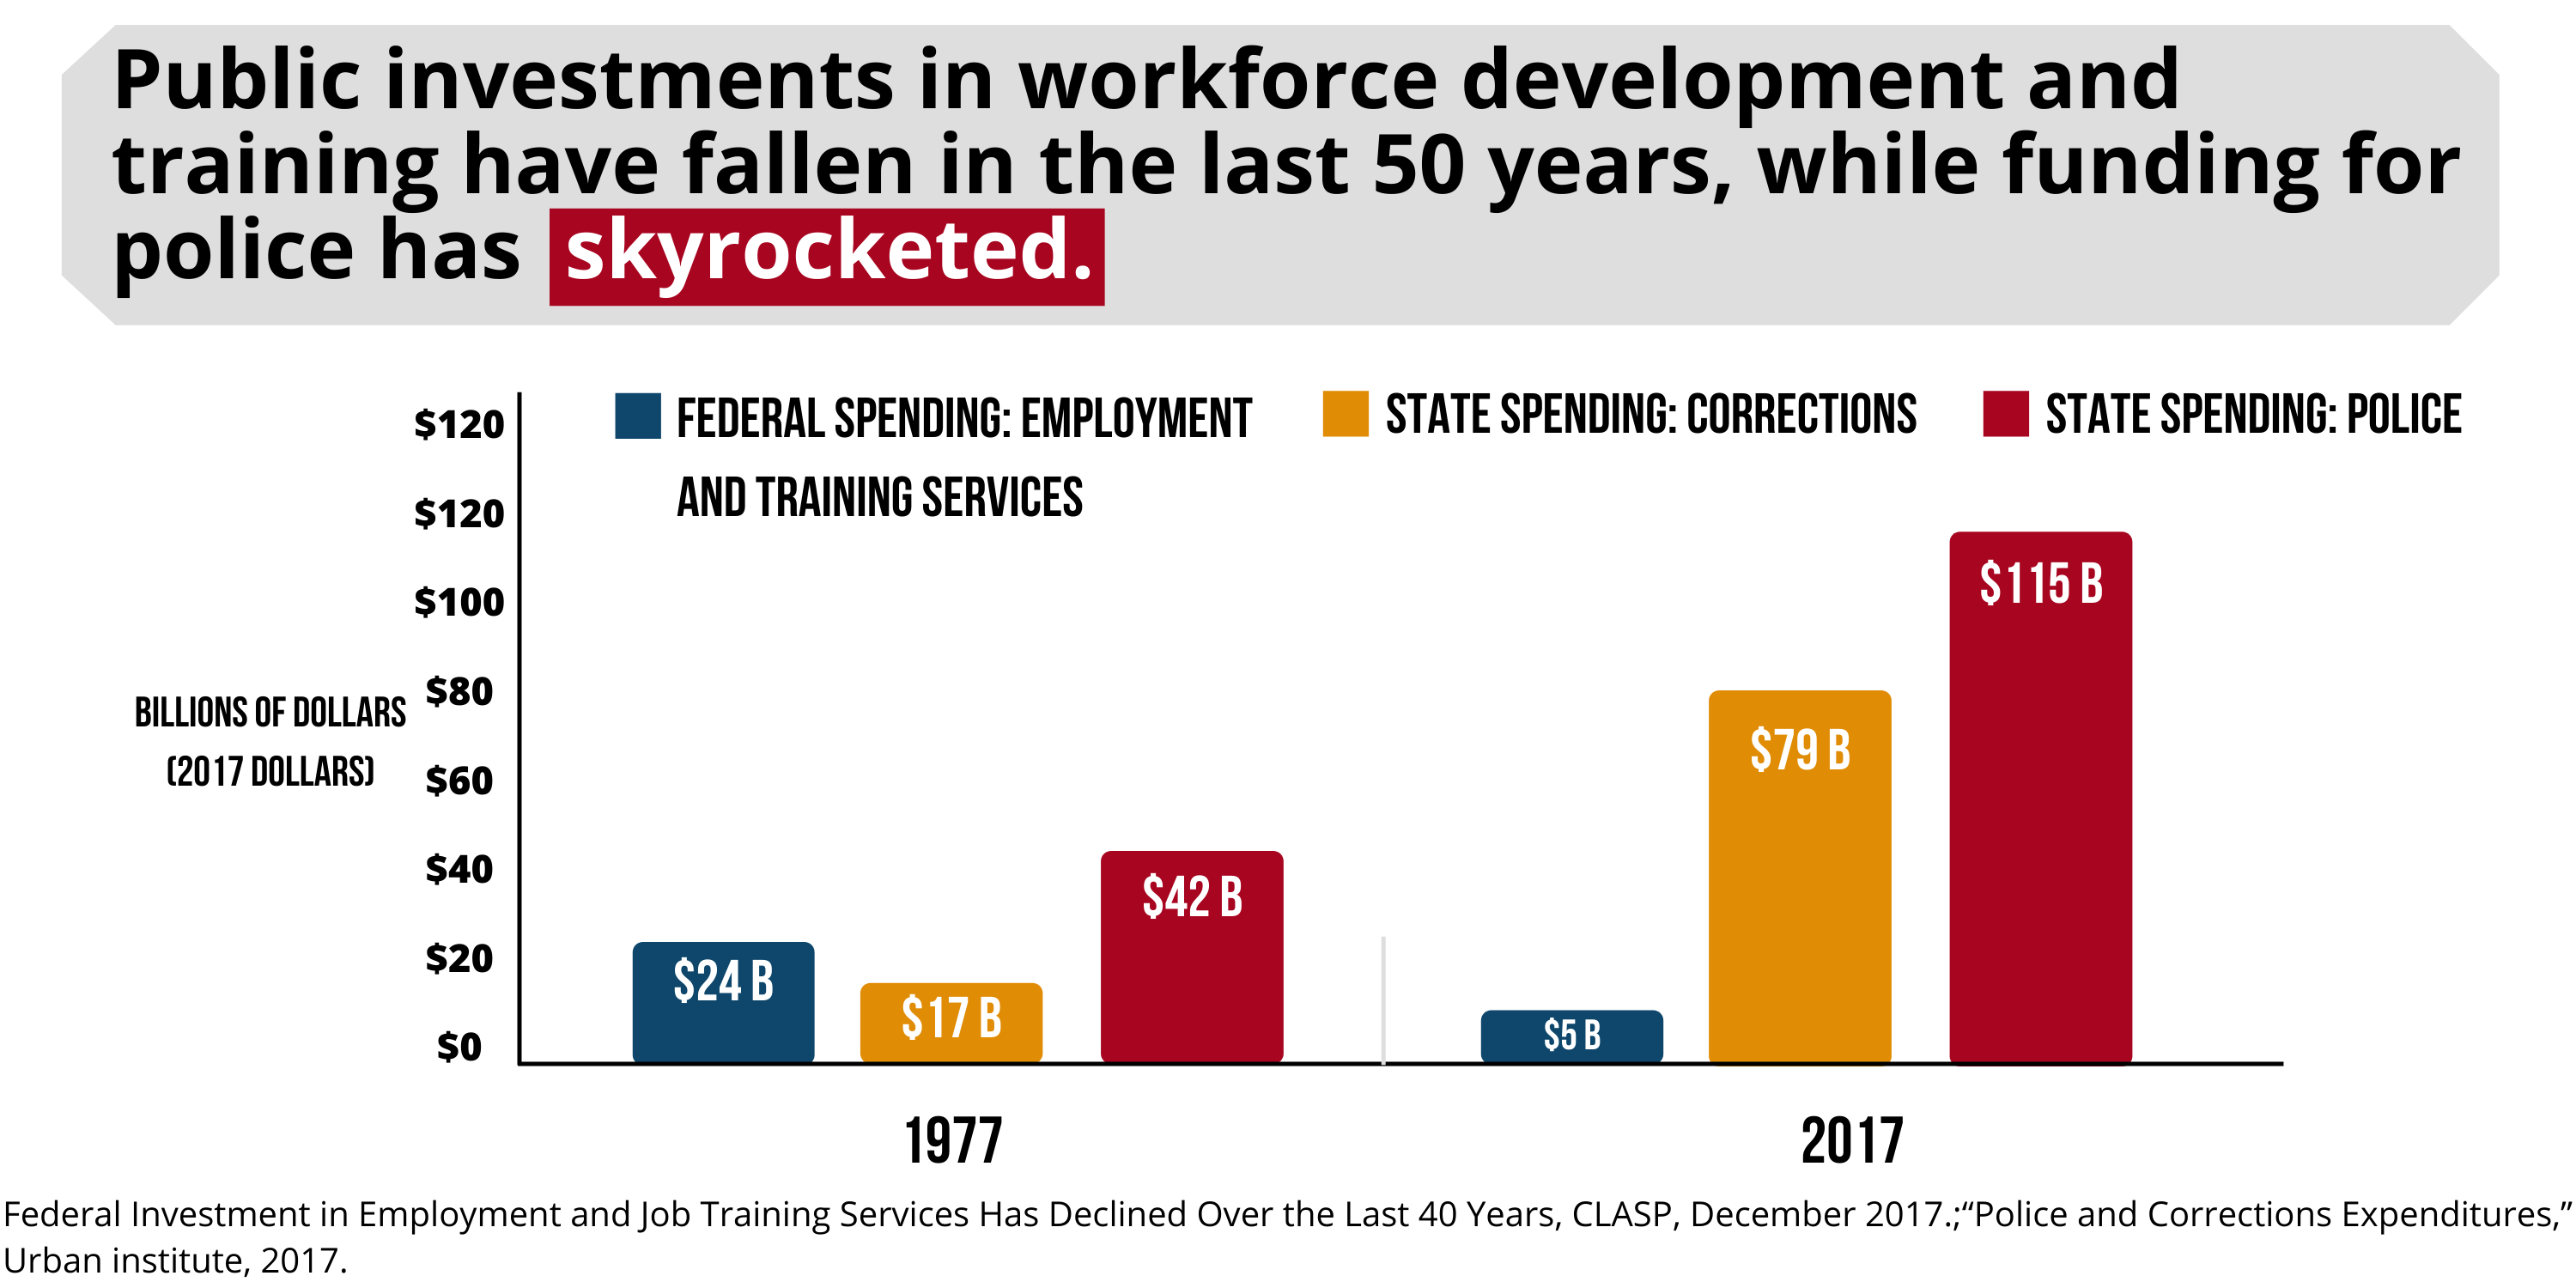 Public investments in workforce development and training have fallen in the last 50 years, while funding for police has skyrocketed.